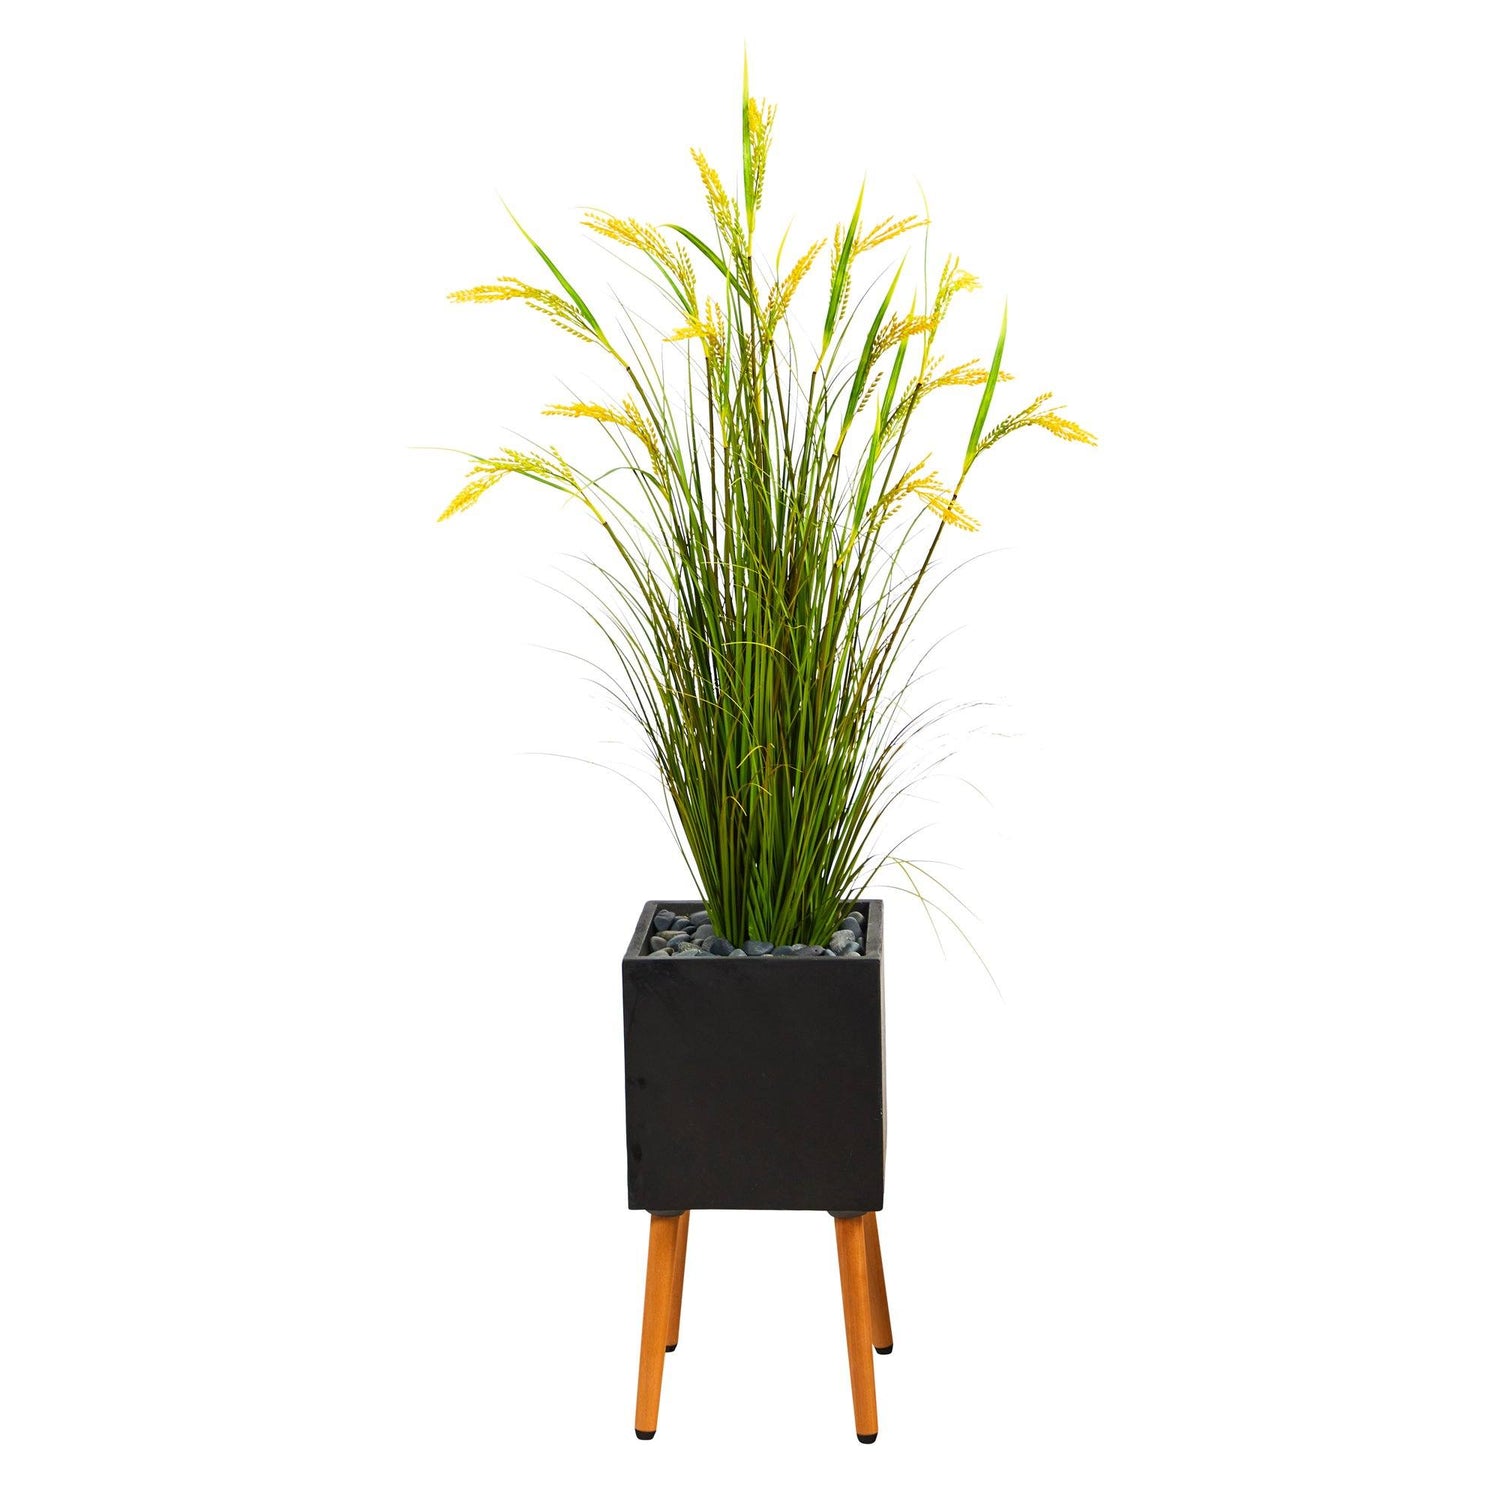 62” Wheat Grain Artificial Plant in Black Planter with Stand